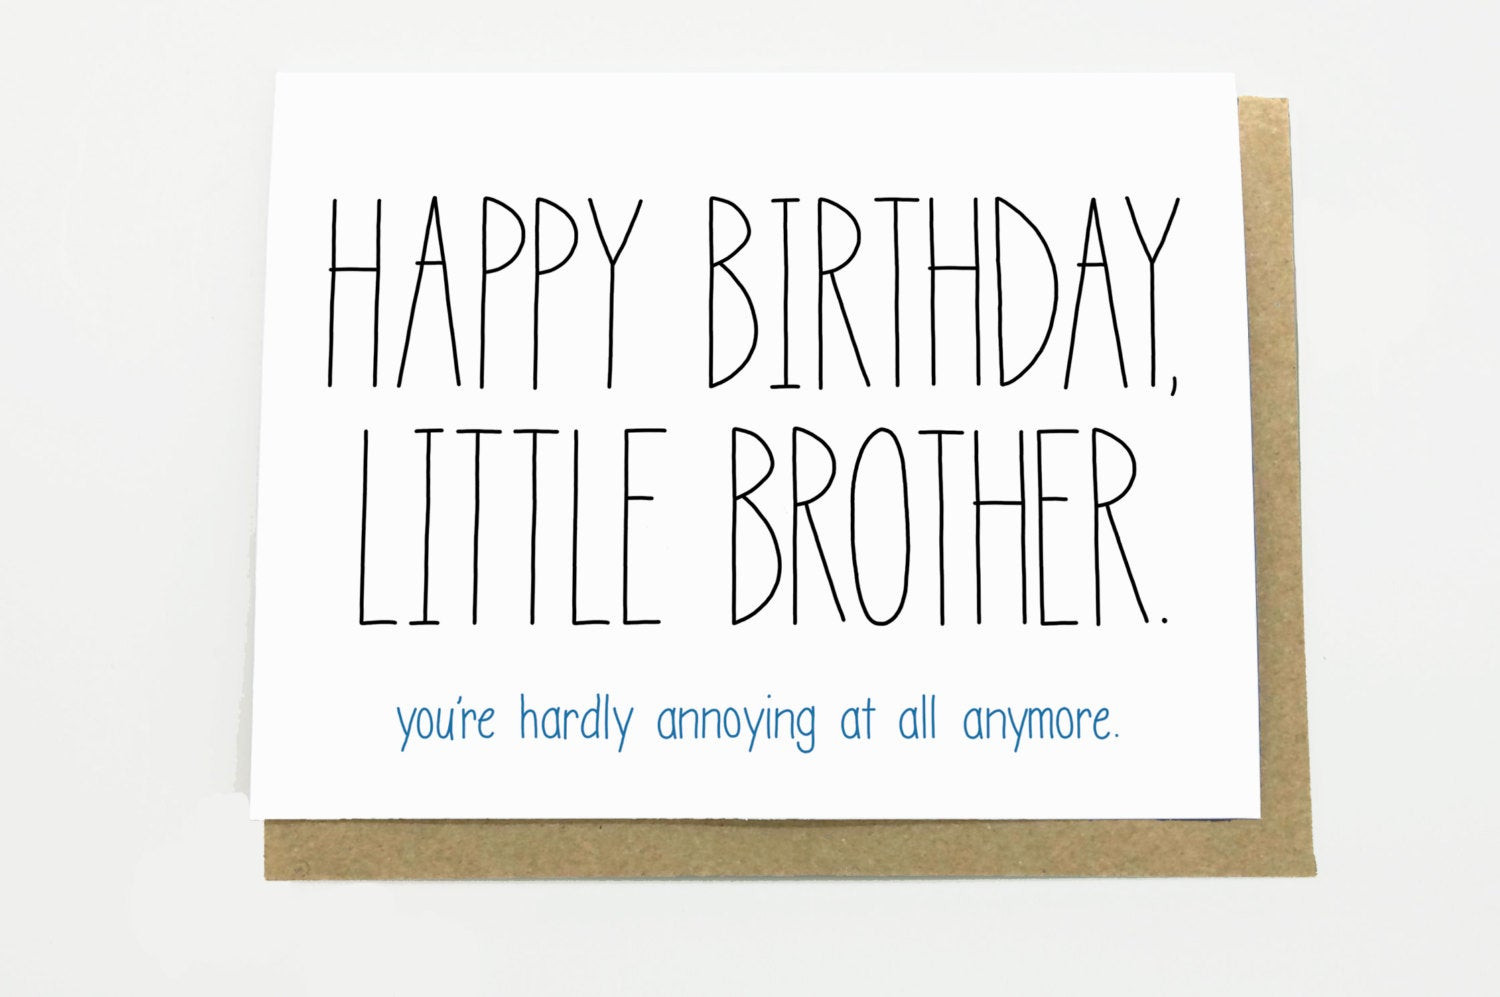 Happy Birthday Lil Brother Funny
 Funny Birthday Card Little Brother You re by CheekyKumquat